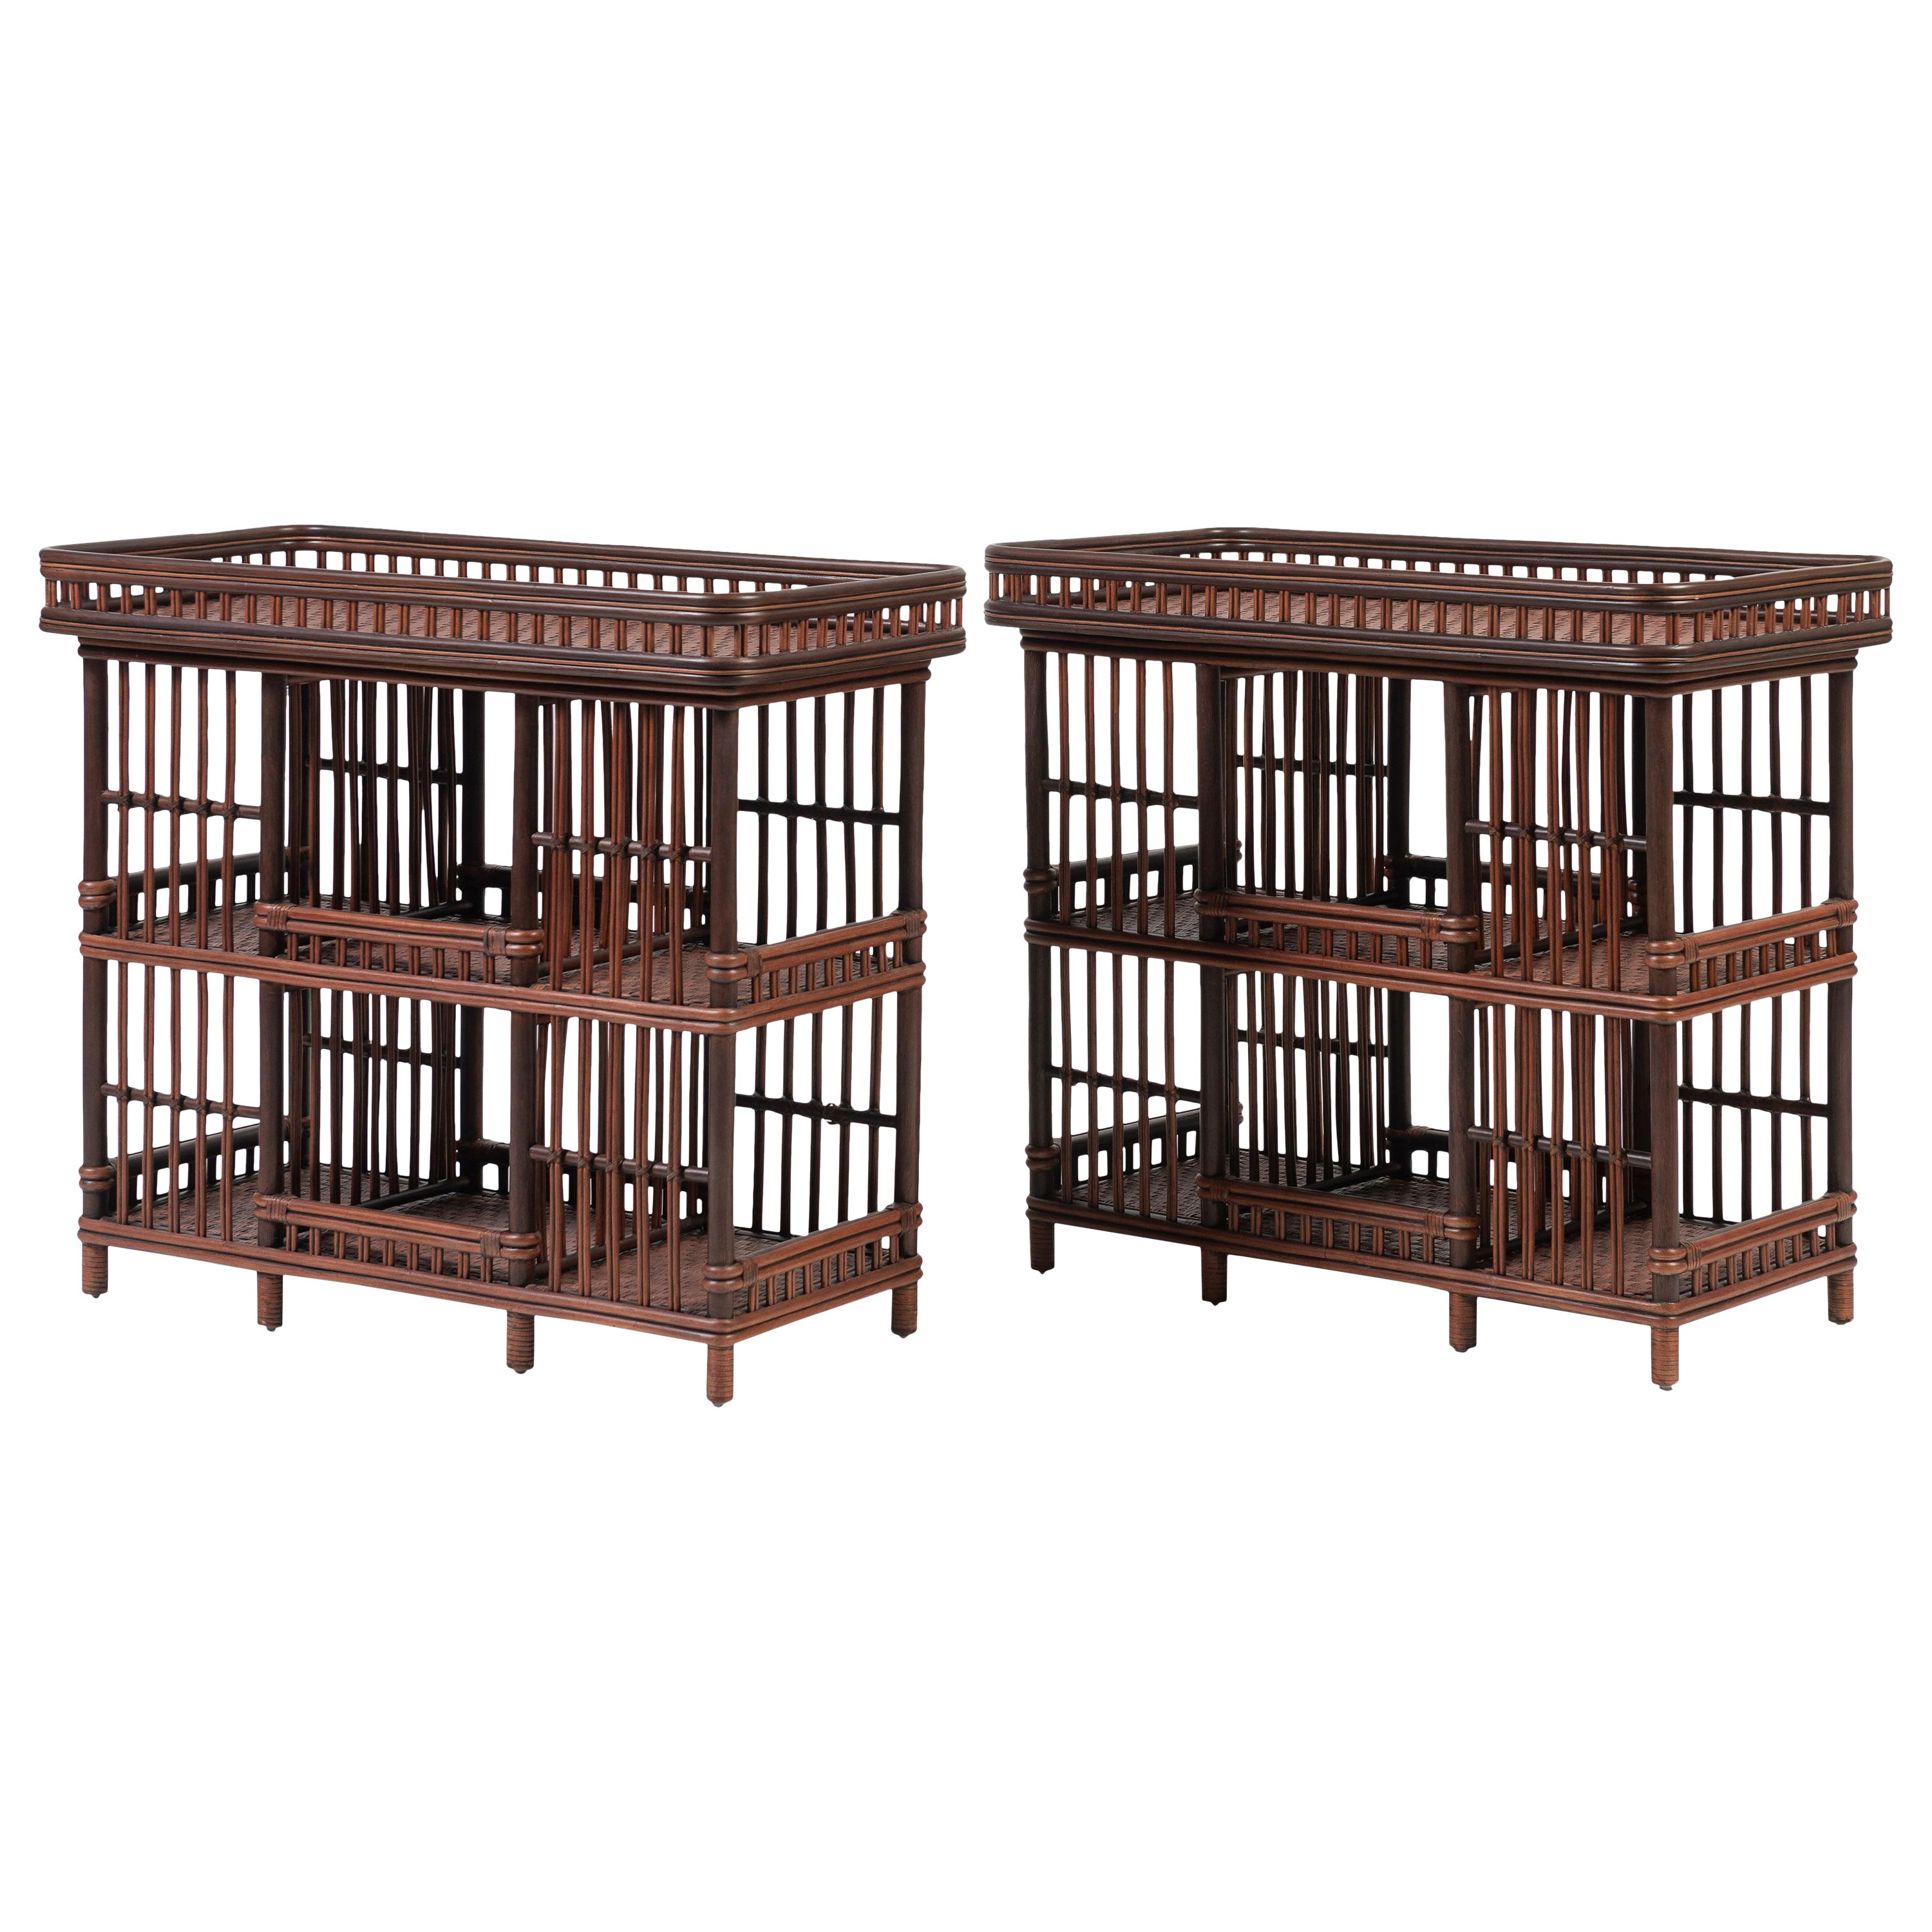 Two Williamsburg Coffee Finish Wicker Tiki Bars, Etegeres or Bookcases